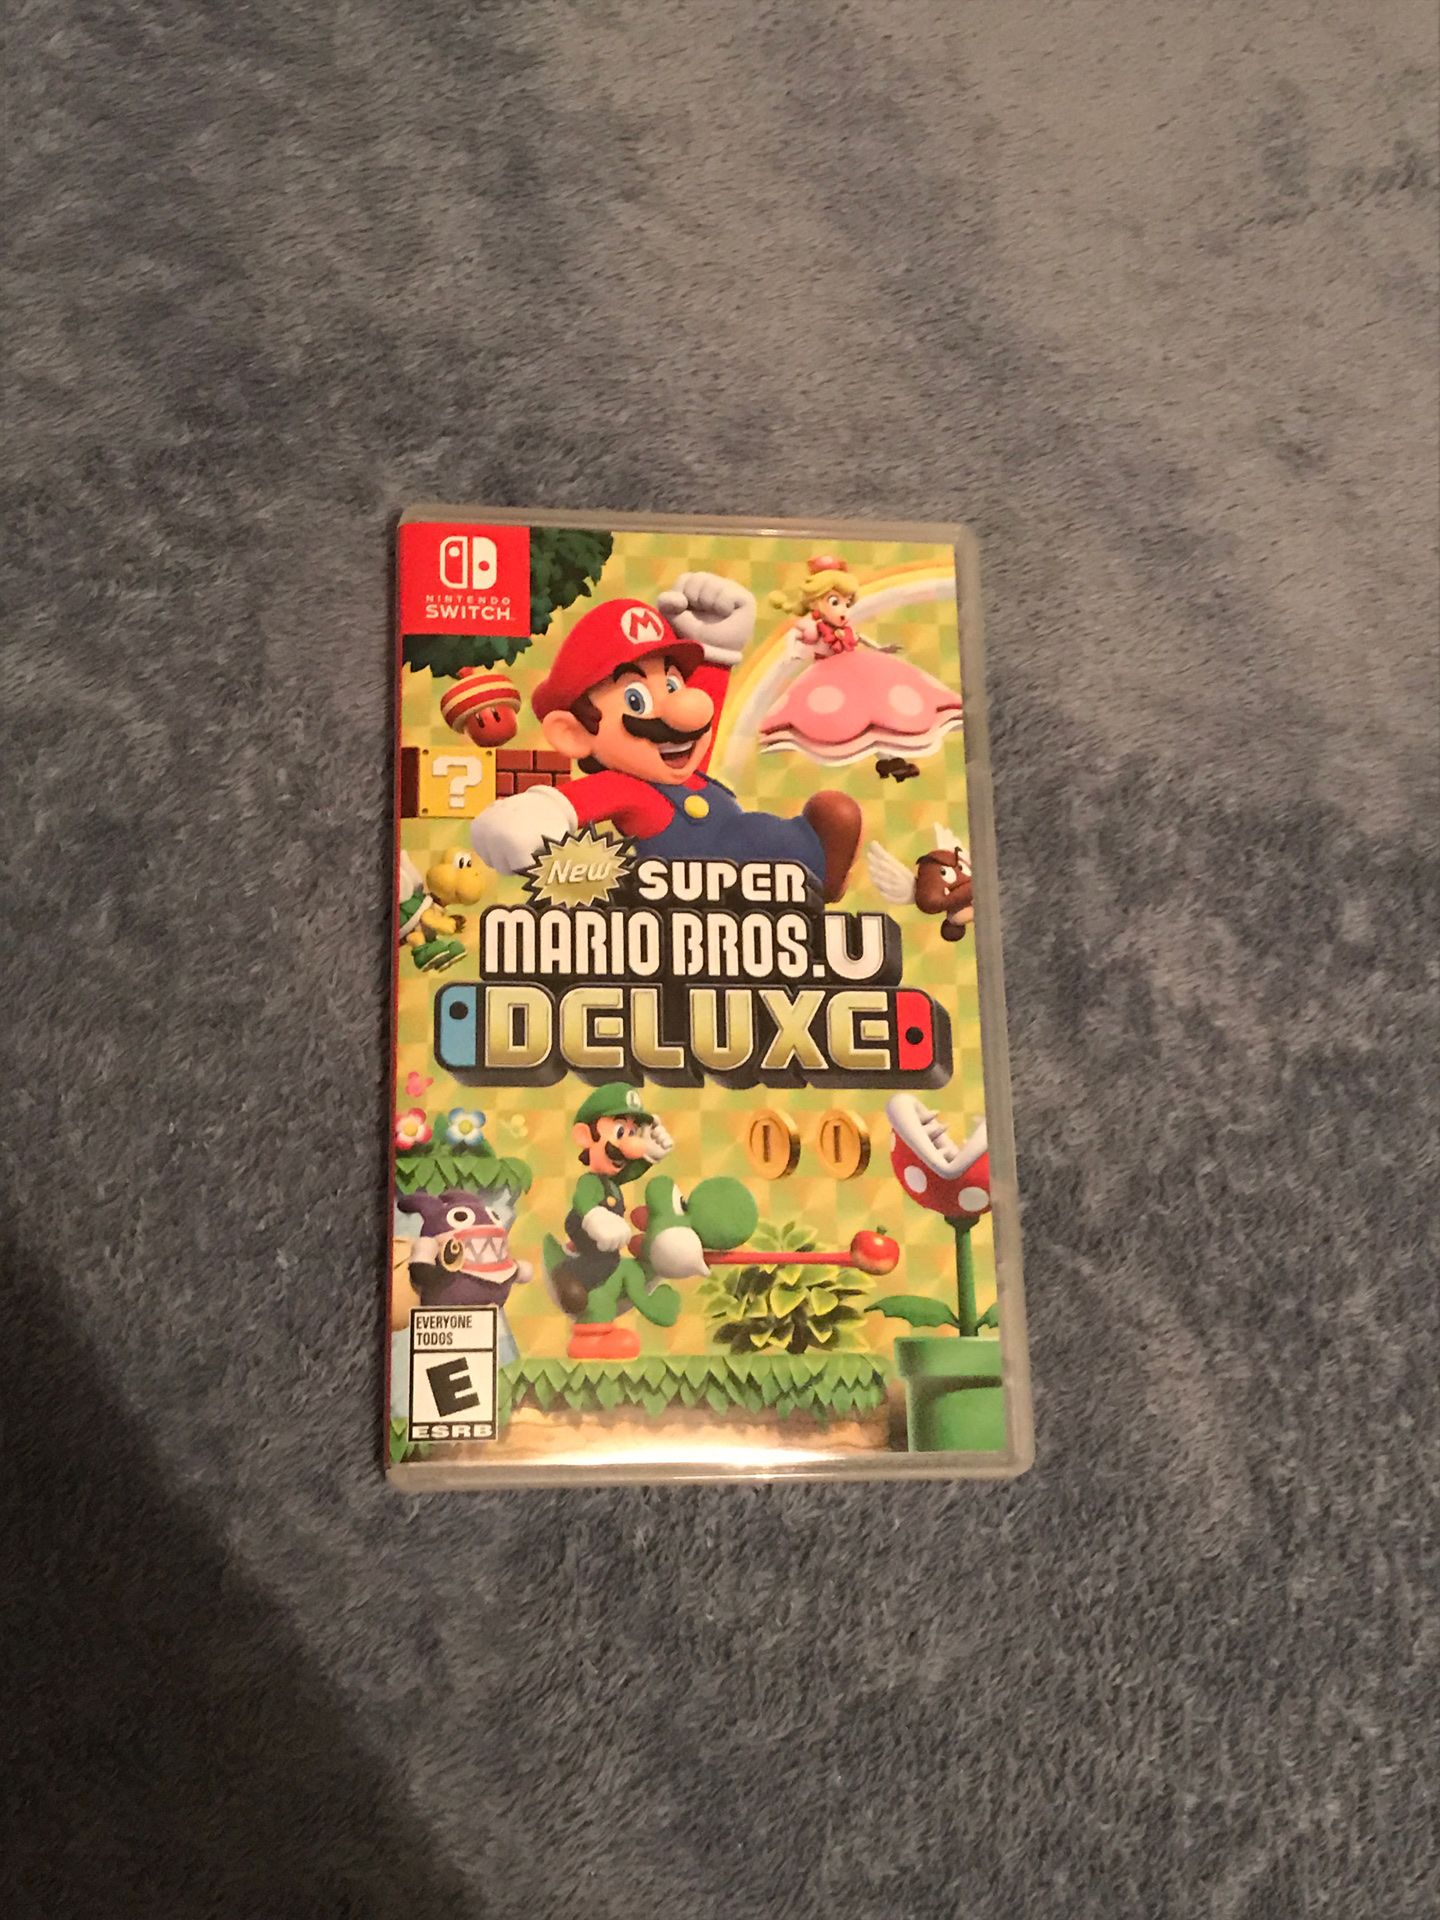 NINTENDO SWITCH GAME. Looking to trade for Smash Bros.